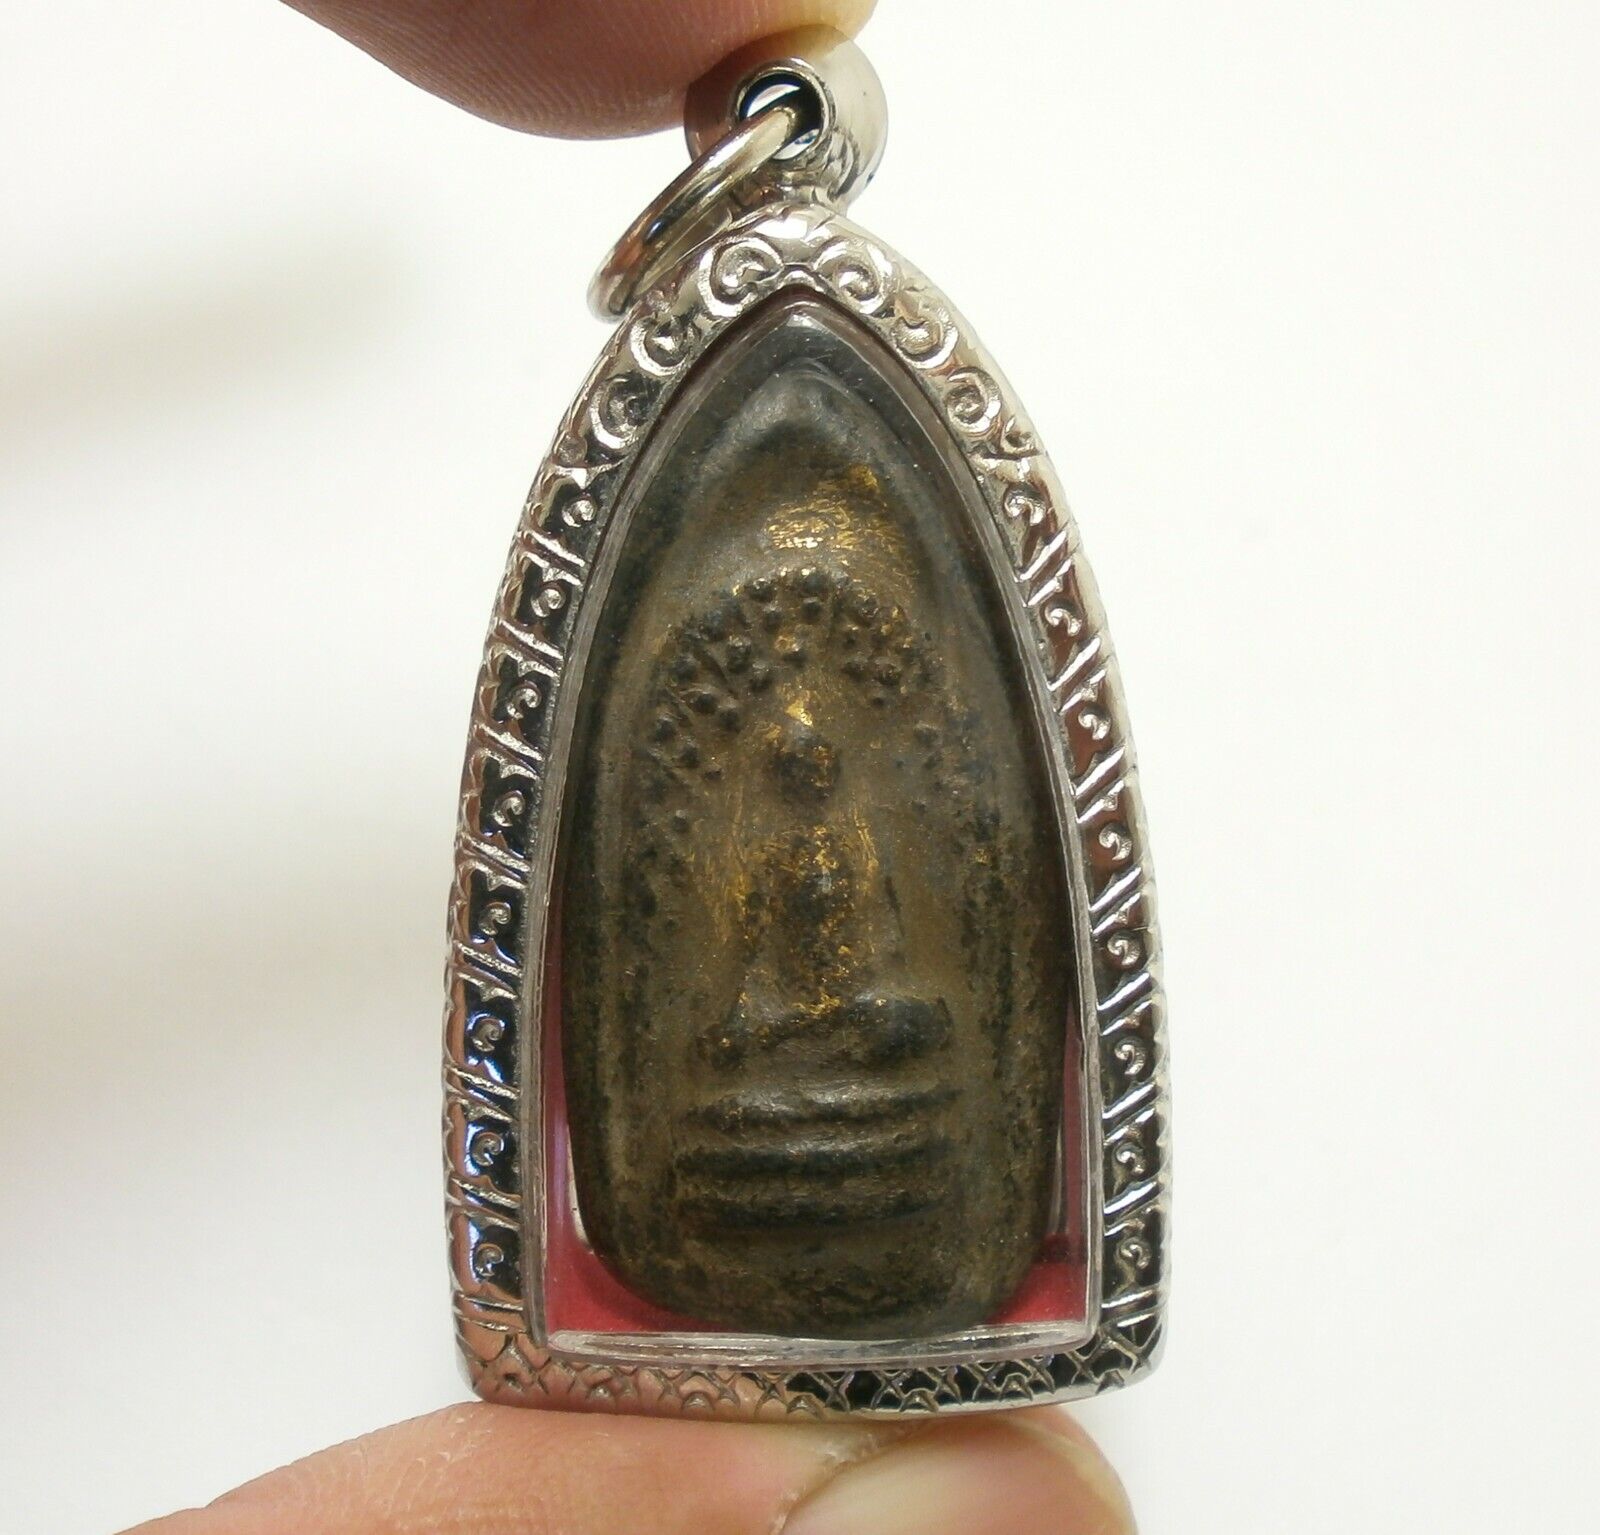 PHRA GRING KLONGTAKIEN BLESSED IN 1942 KRING THAI SUPER STRONG PROTECTION BUDDHA